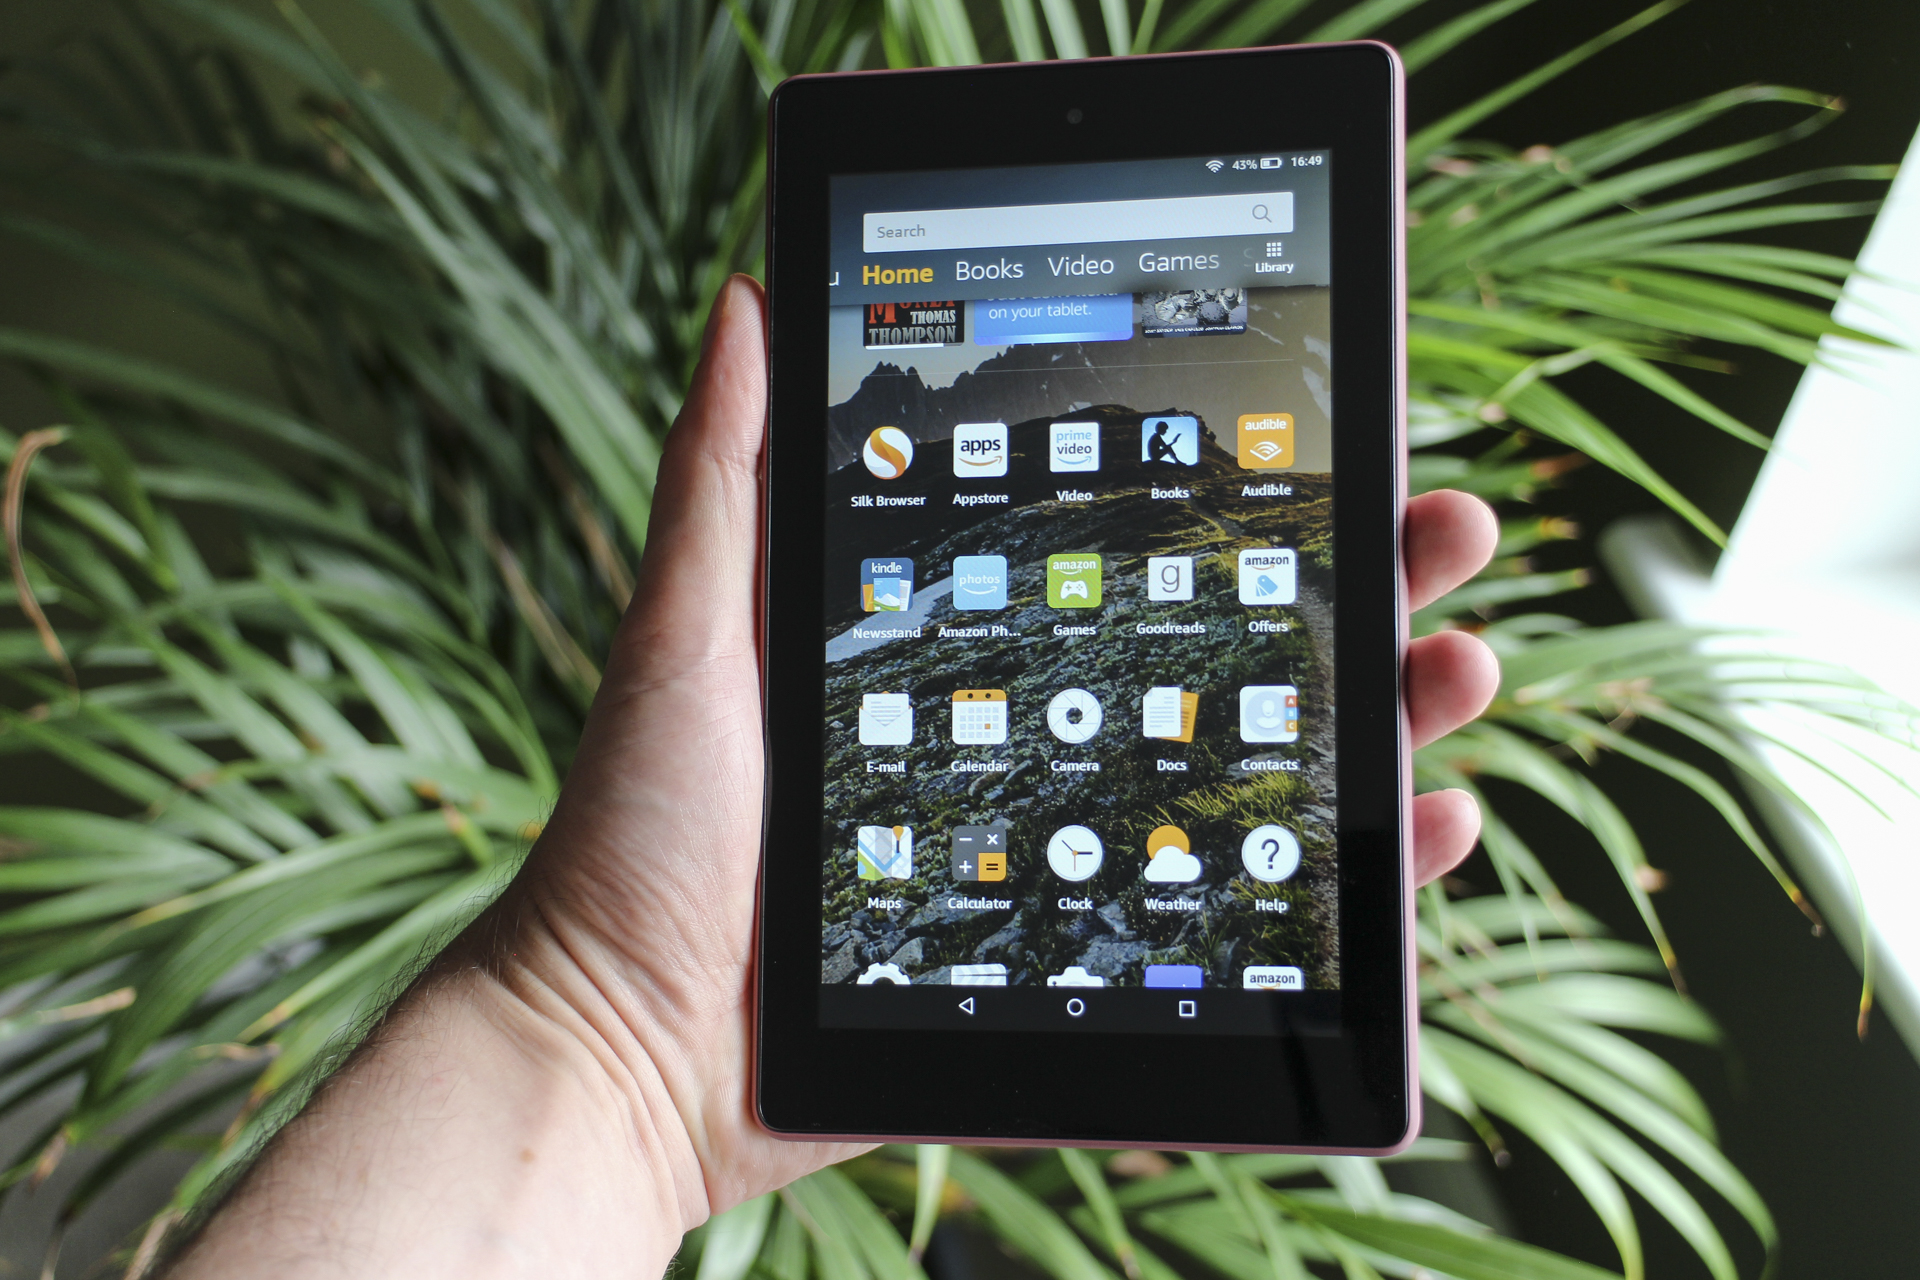 Amazon’s new Fire 7 tablet will attract bargain hunters like moths to a flame